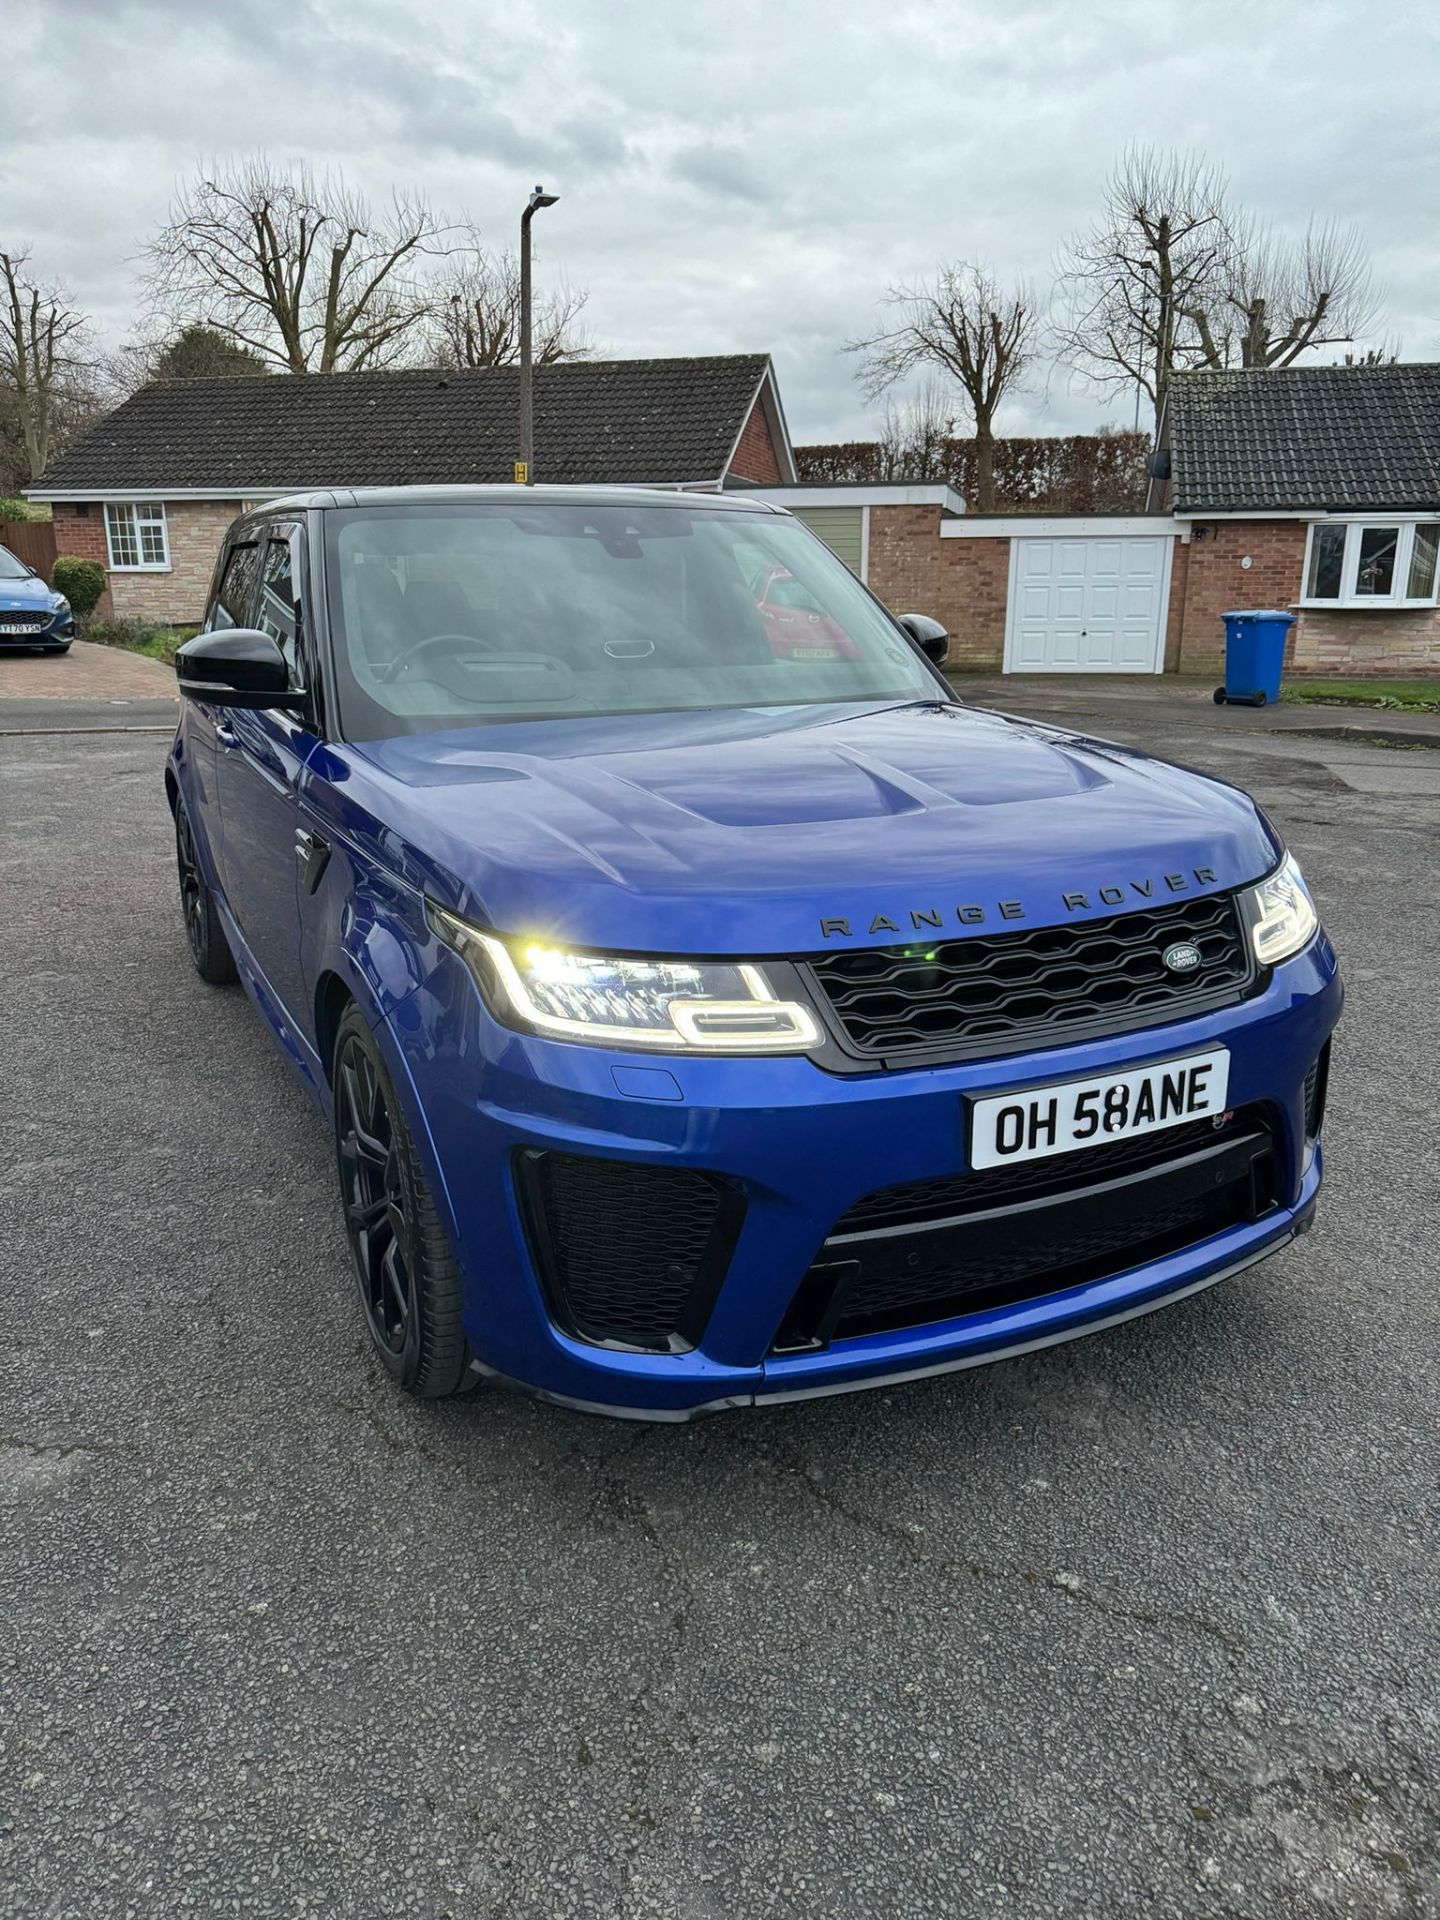 2018 18 RANGE ROVER SVR - REDUCED RESERVE- EXTREMELY CLEAN EXAMPLE - Image 2 of 10